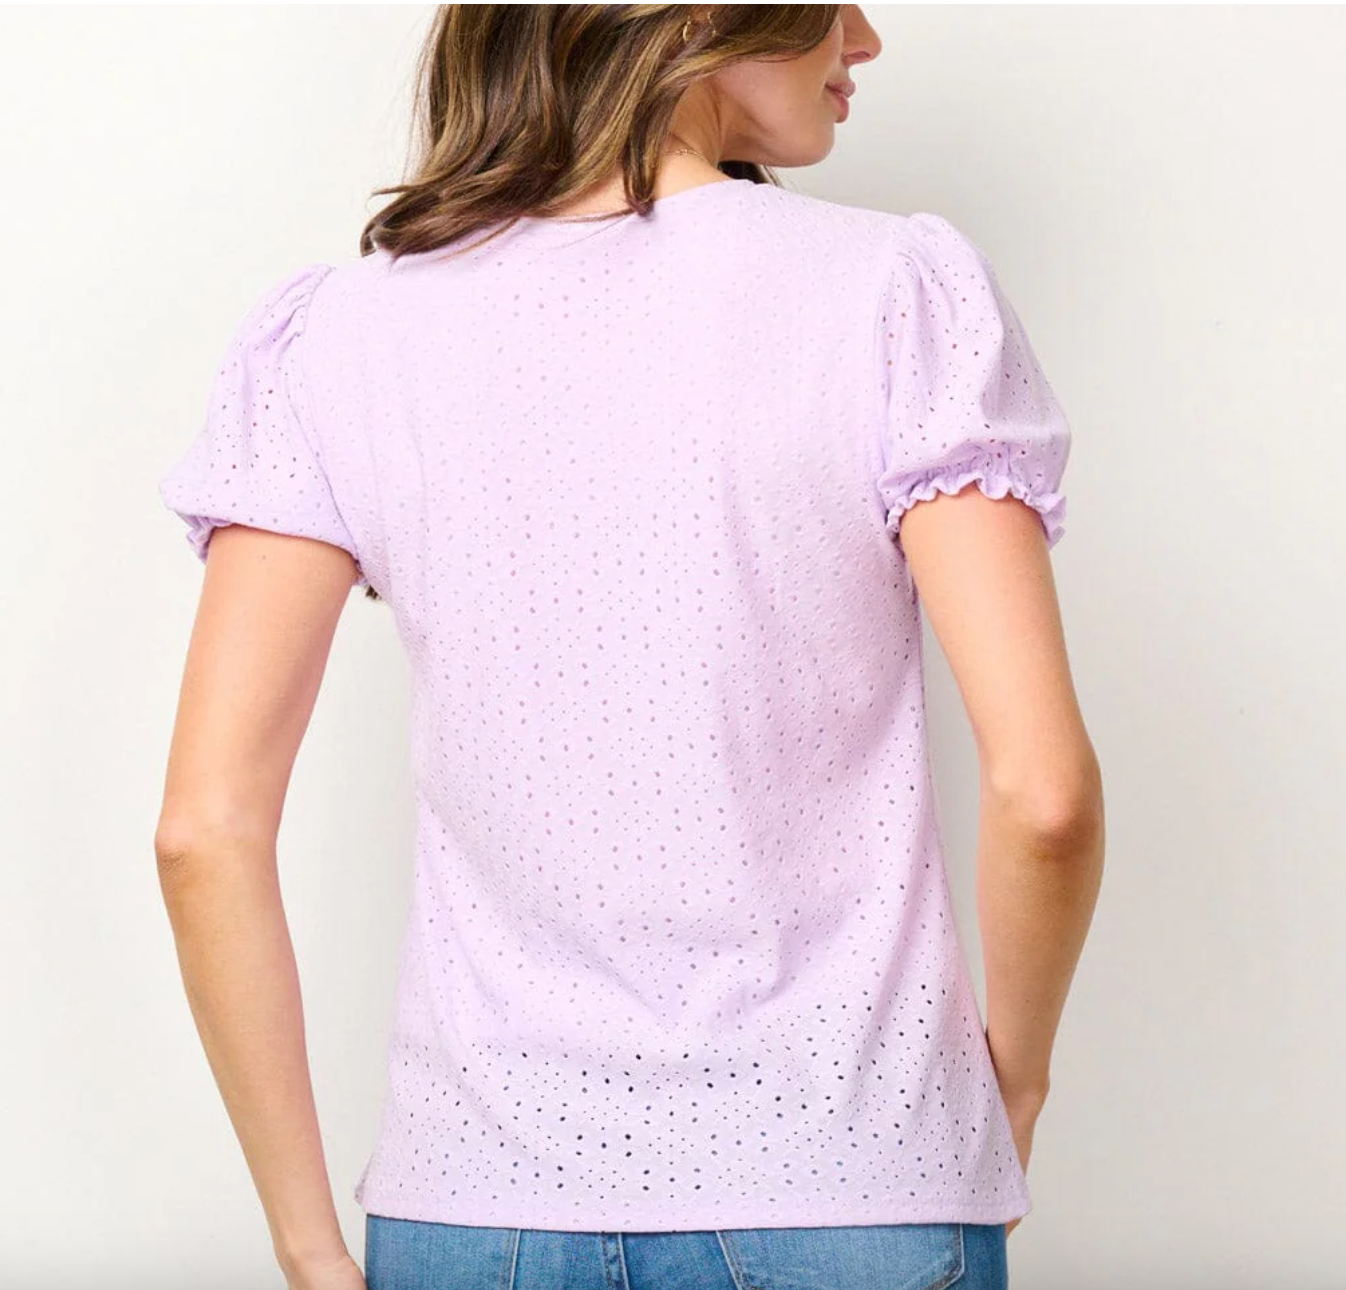 Lace Embrace: Women's Short Sleeve Eyelet Detailed Blouse Top in Lilac